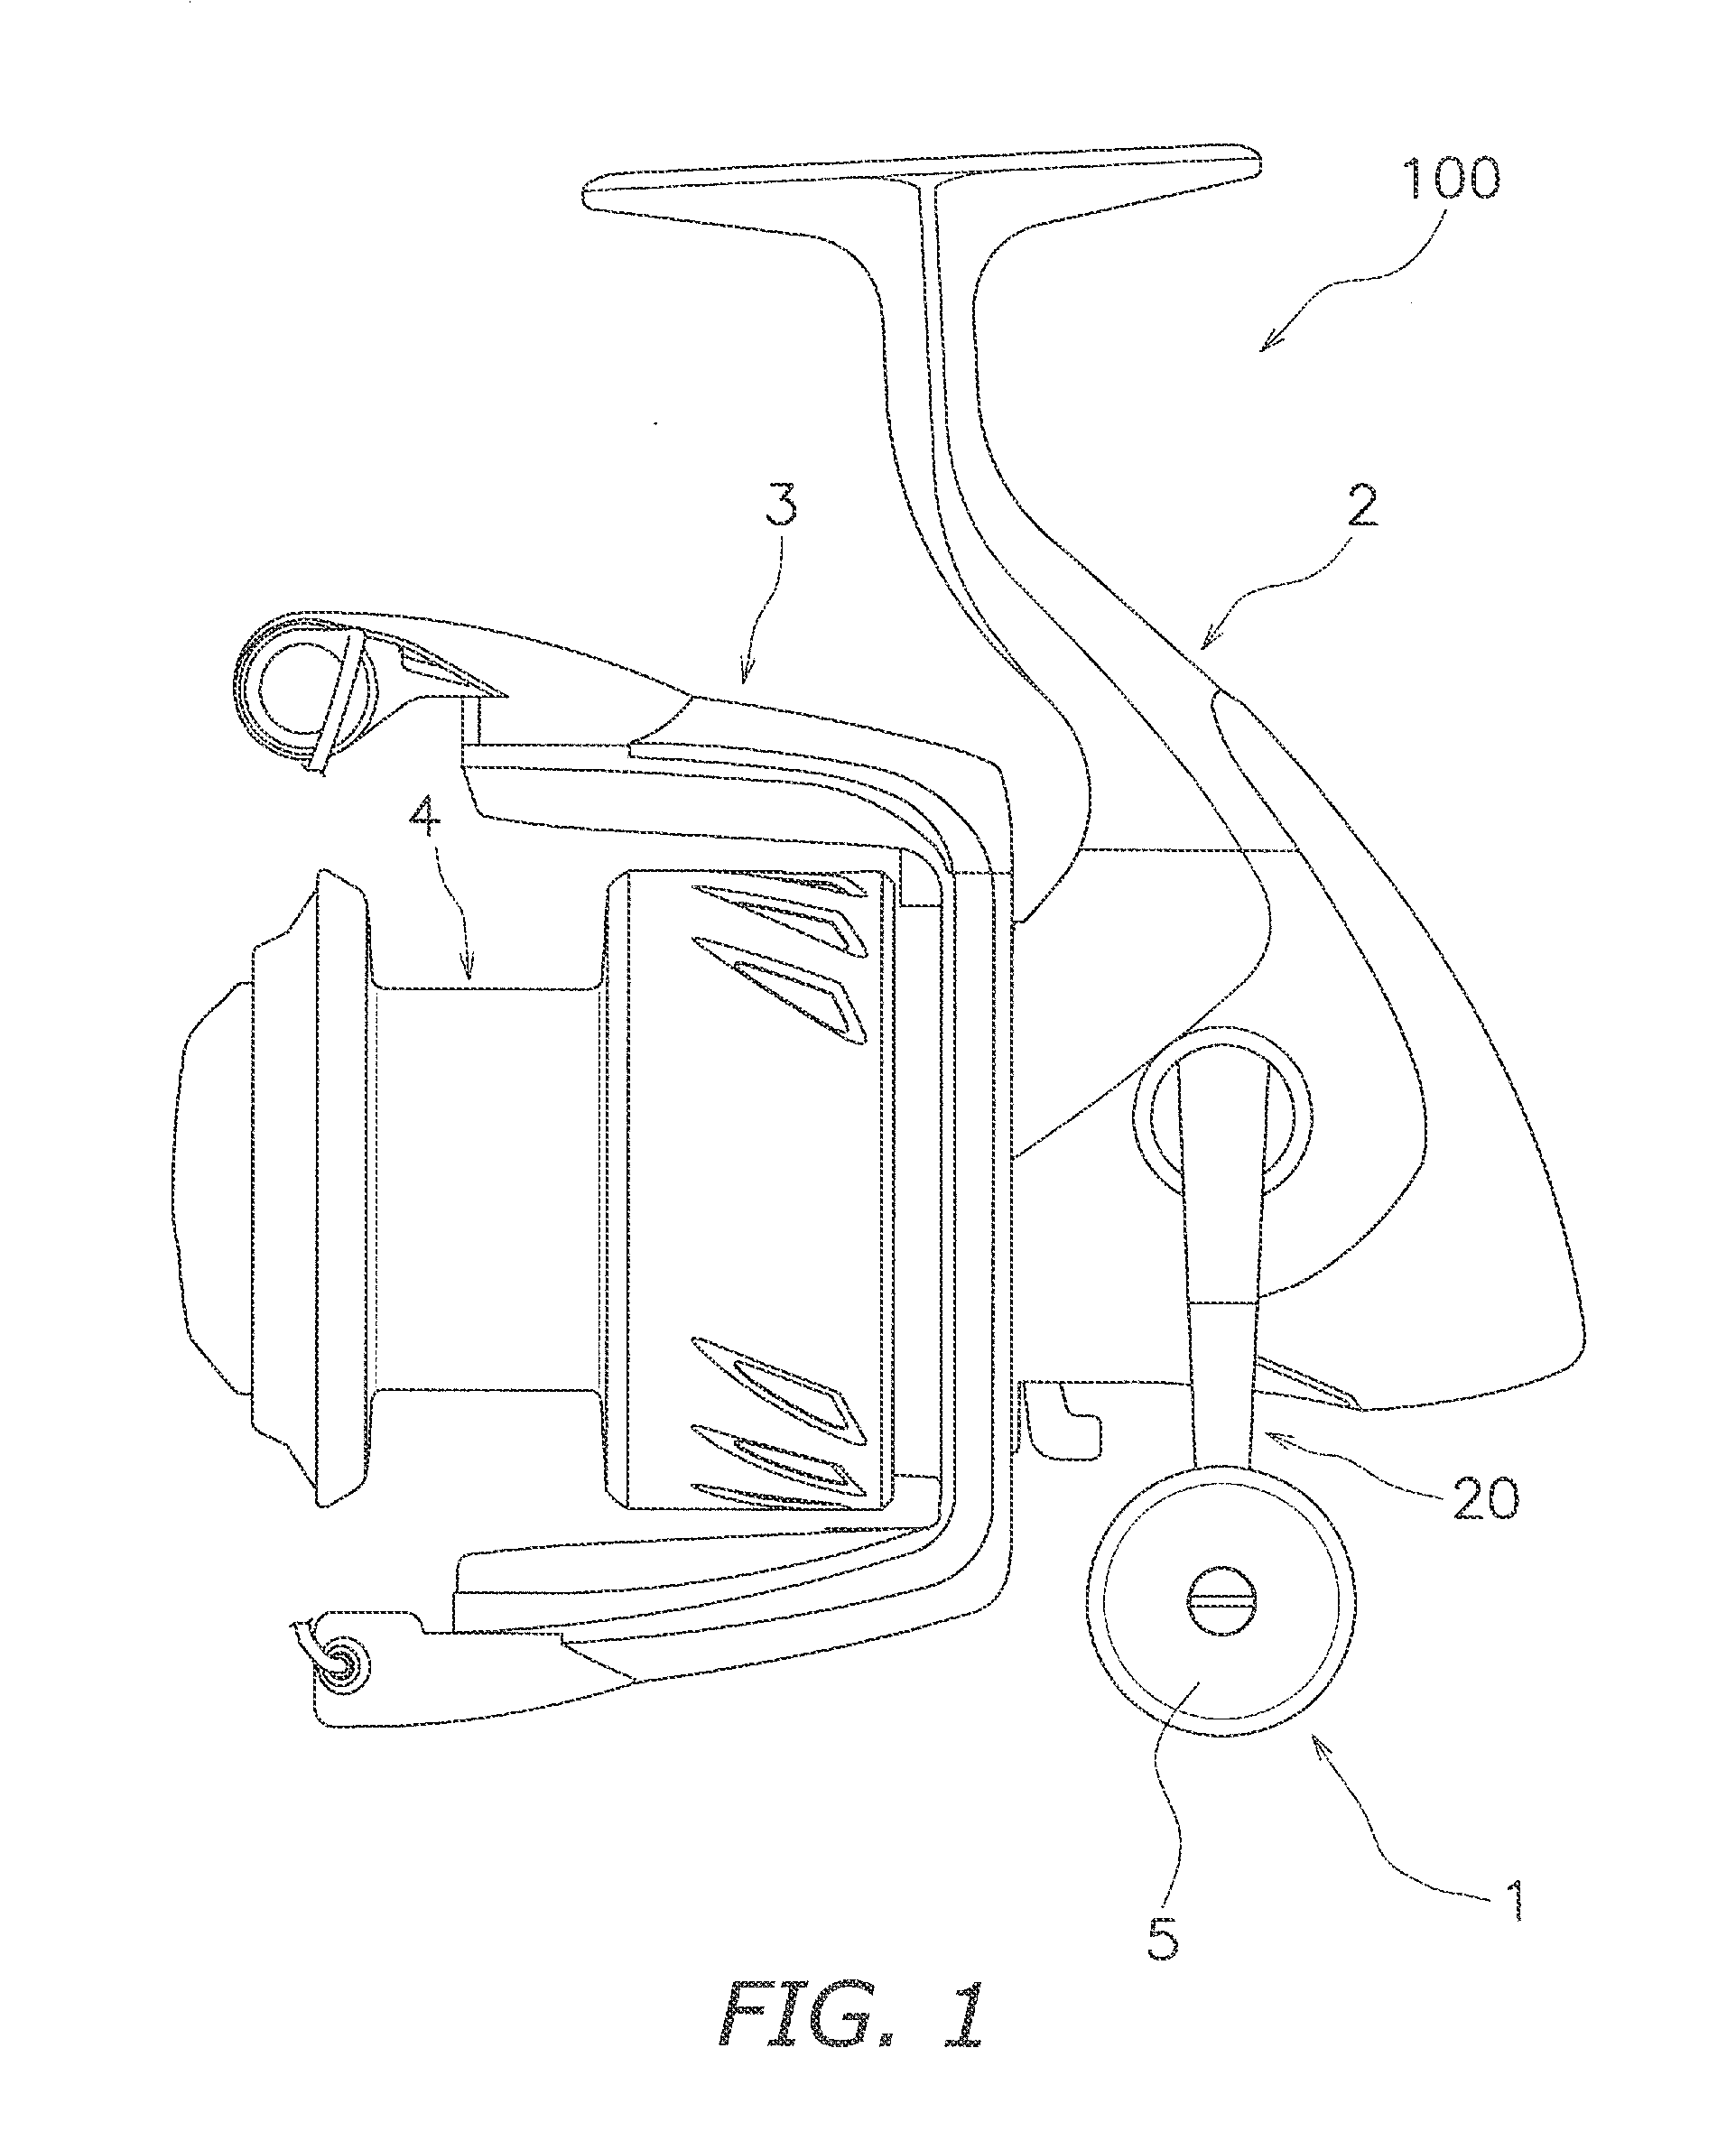 Handle assembly